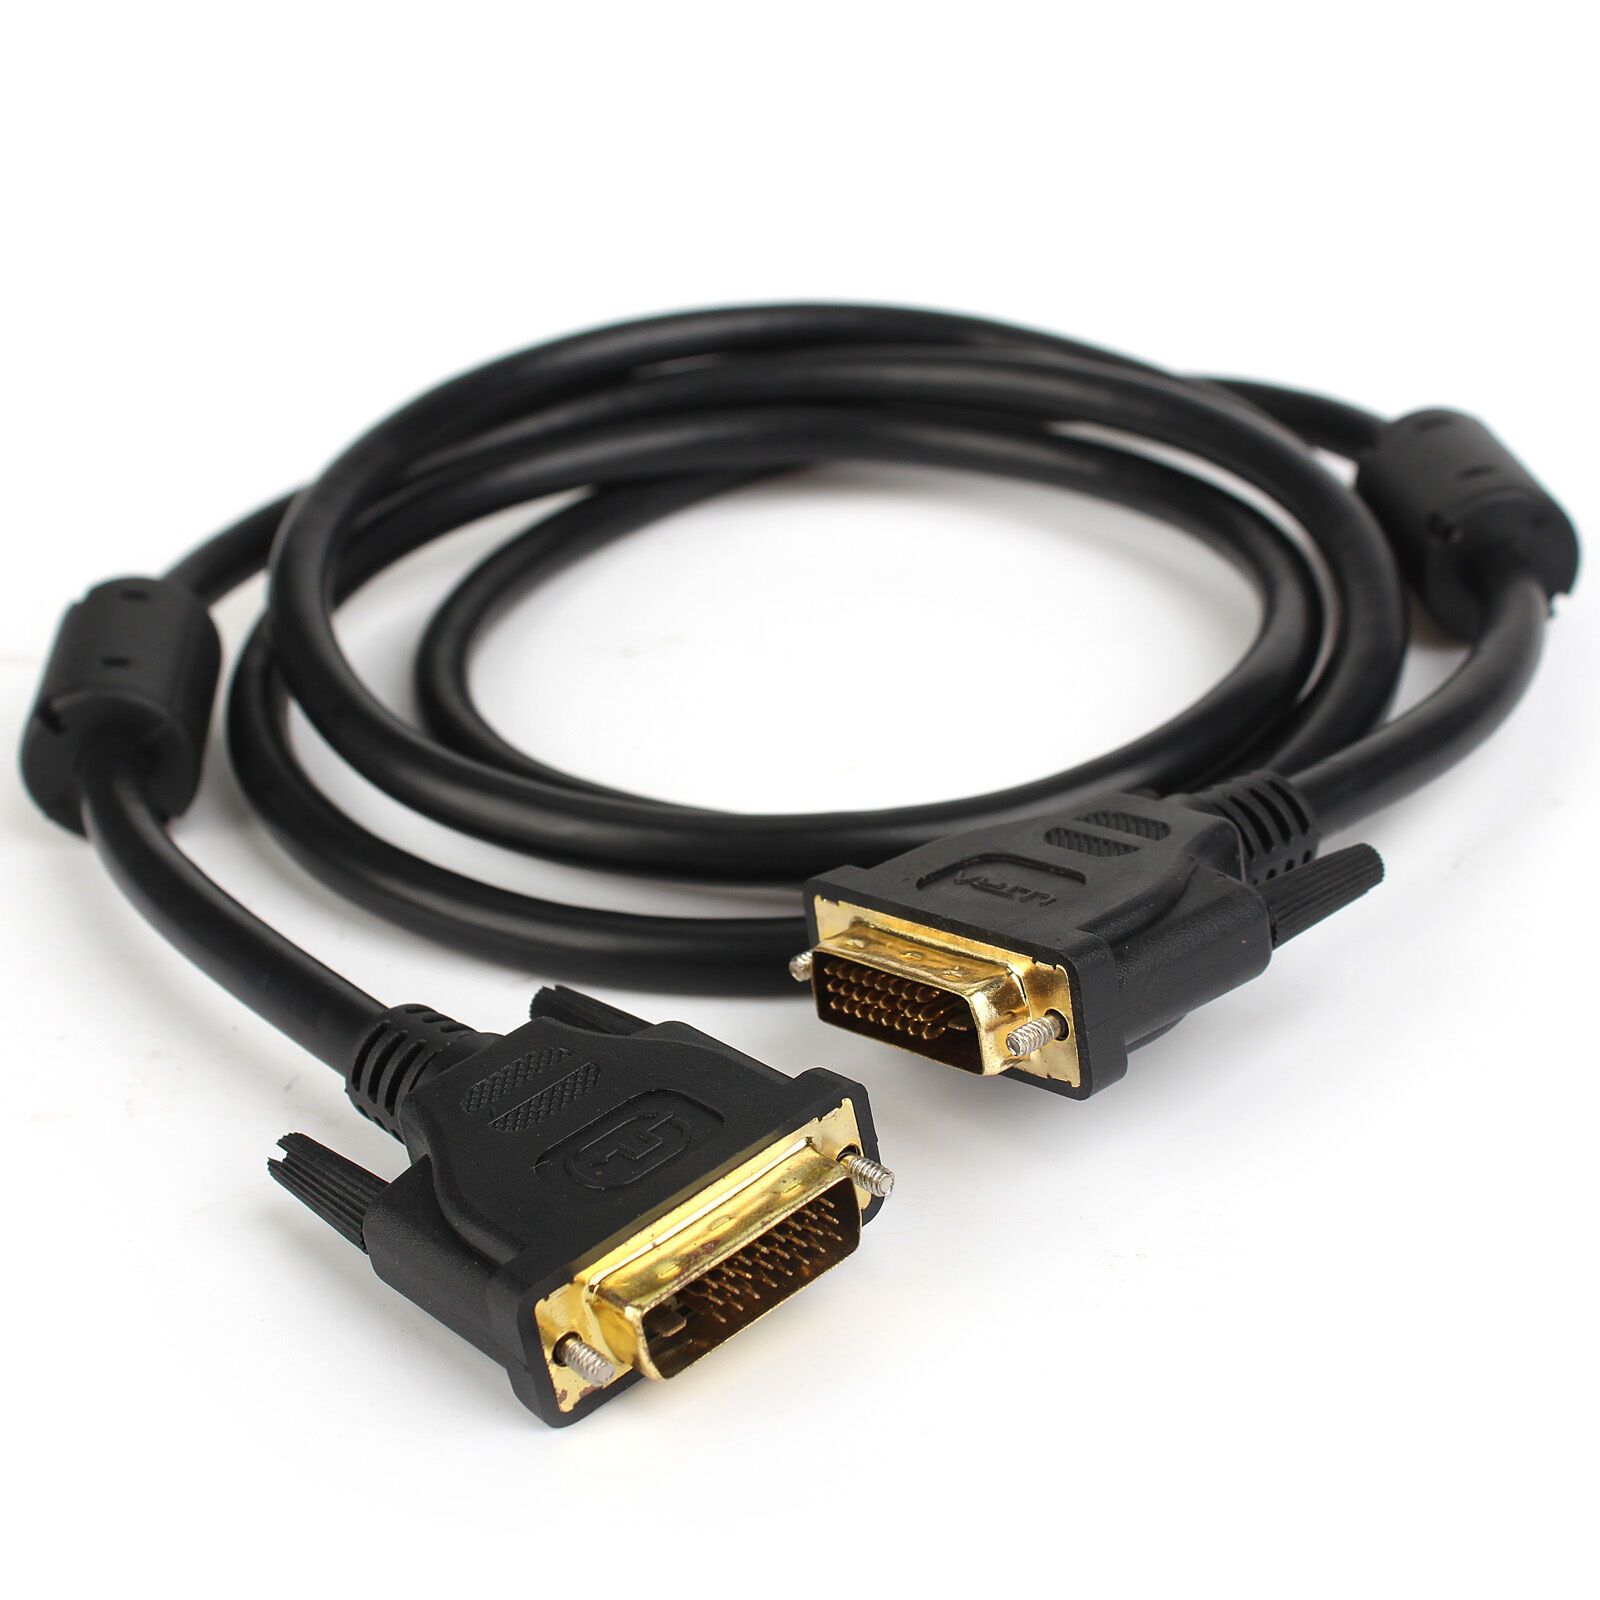  DVI DVI-D Dual Link 24+1 Male to Male Cable Adapter Gold Plated with Ferrites